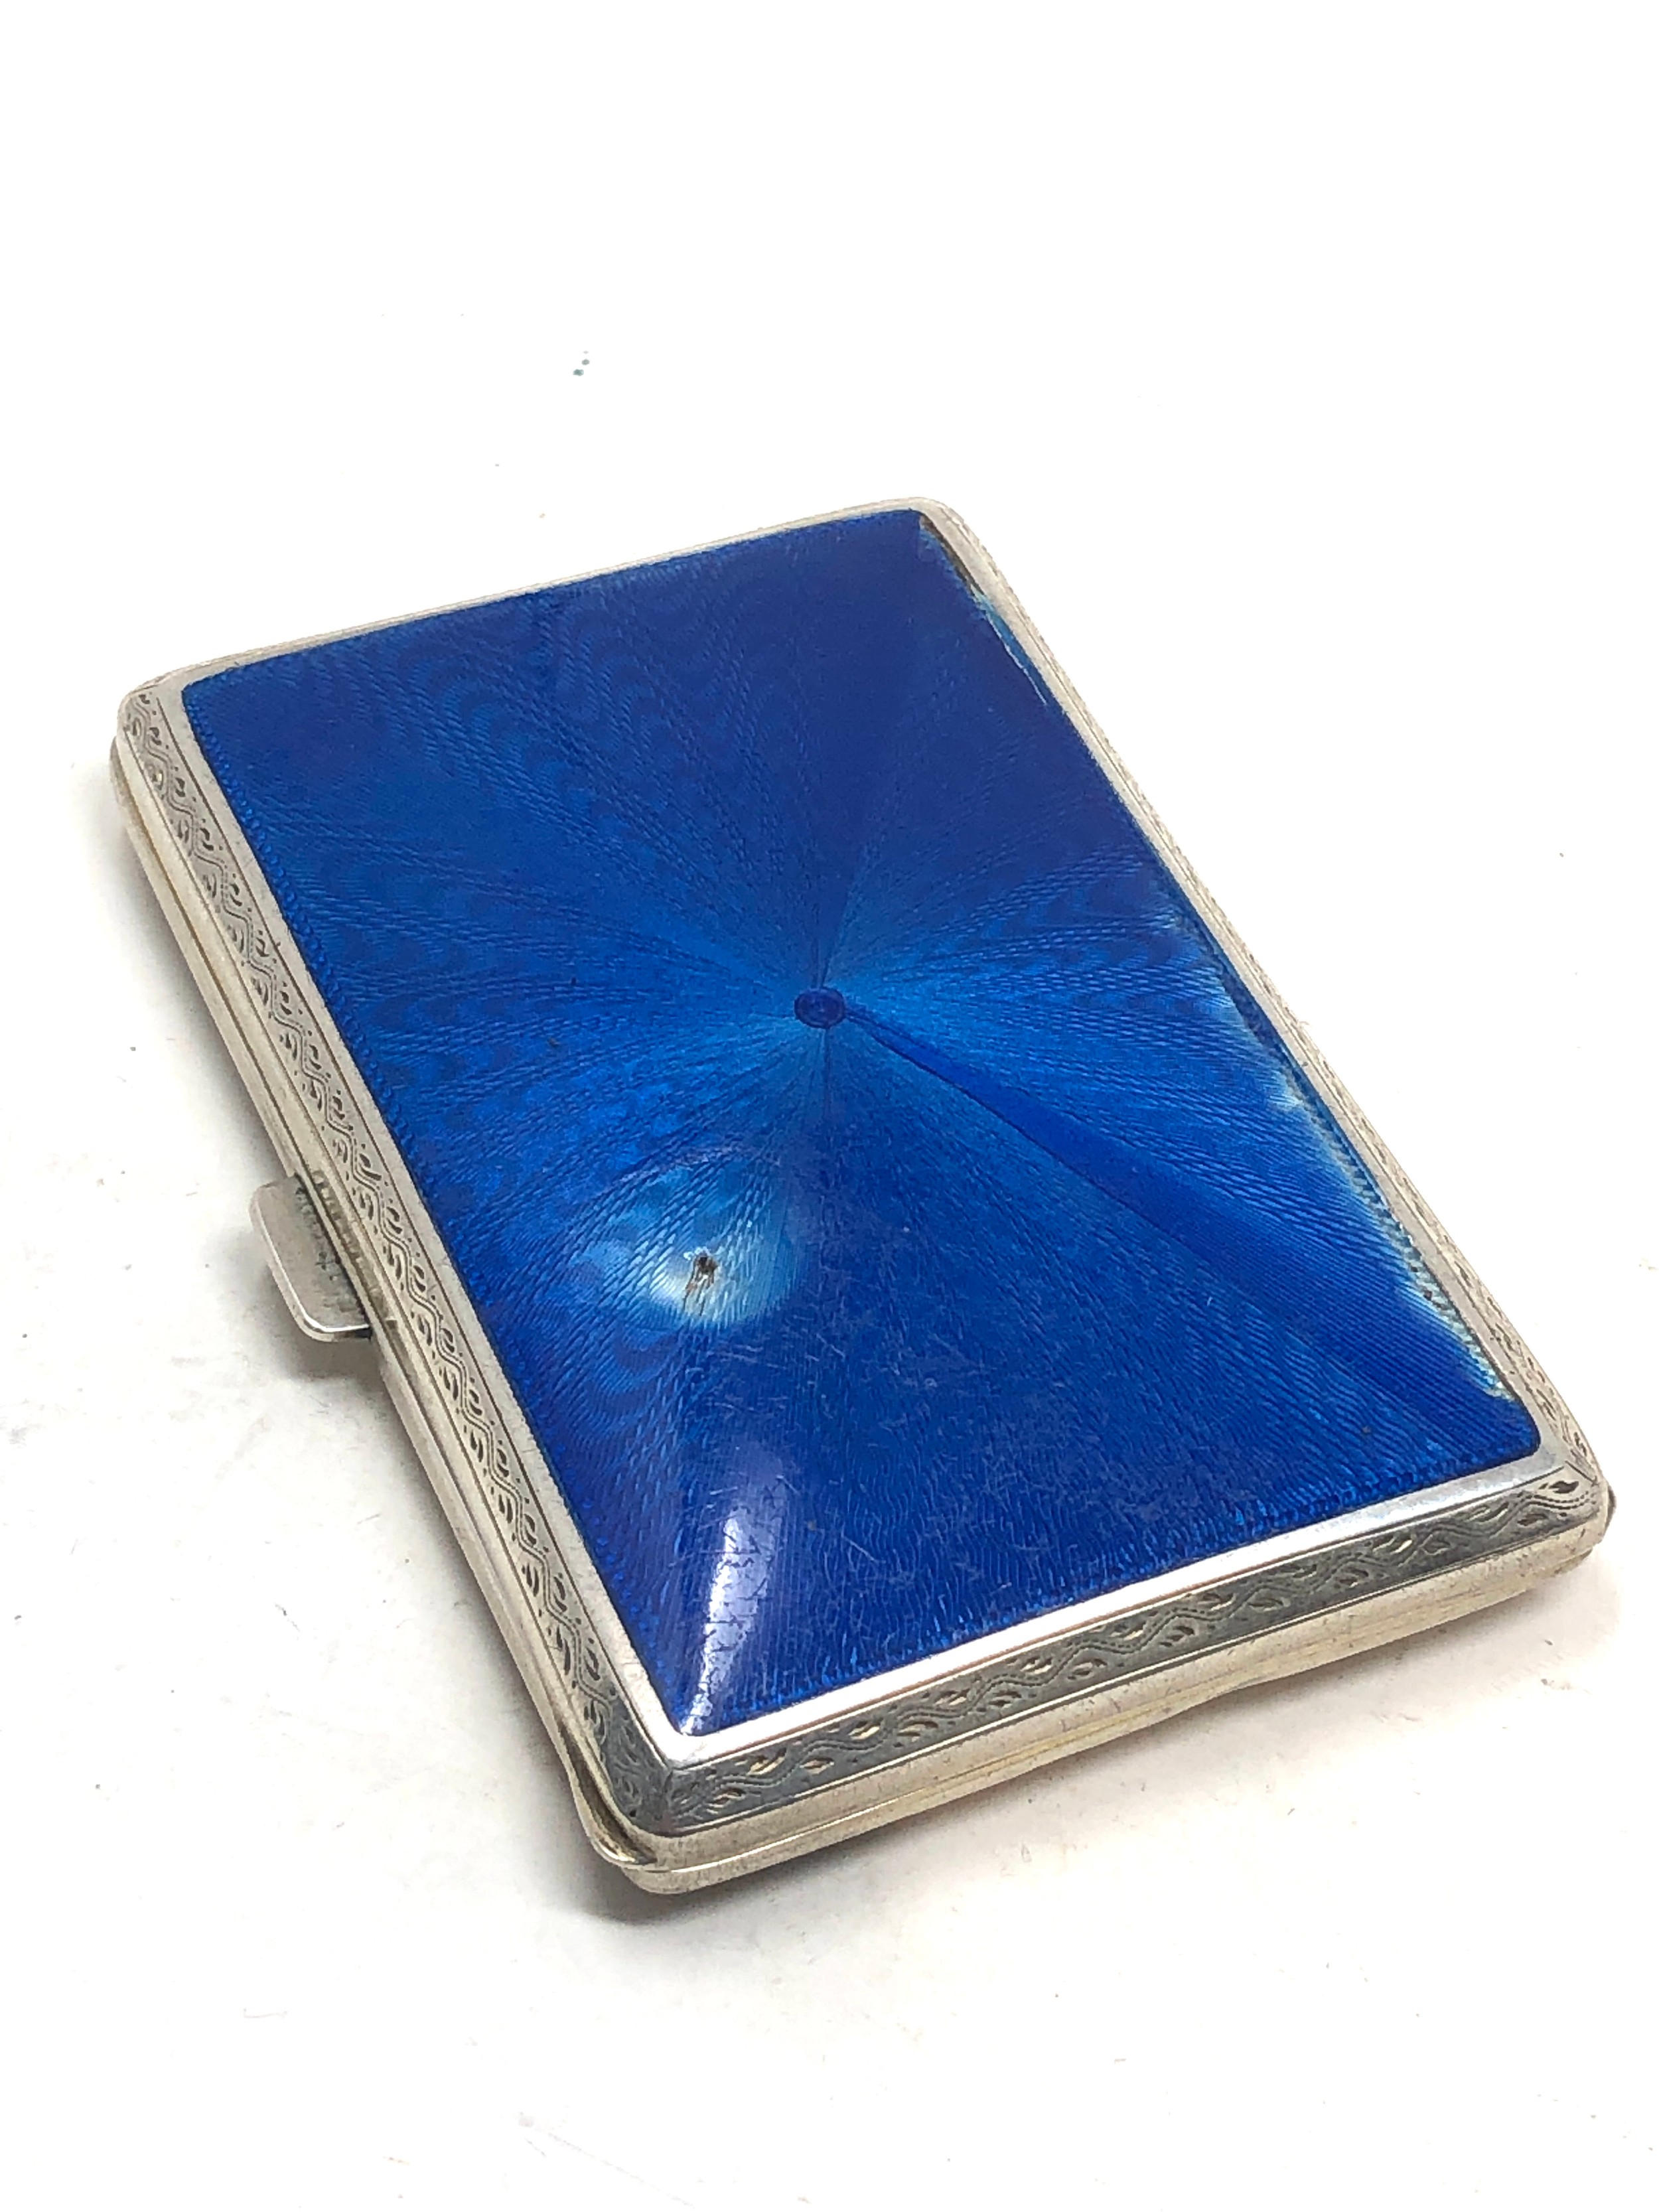 Silver & enamel cigarette case chip and wear to enamel weight 94g - Image 2 of 4